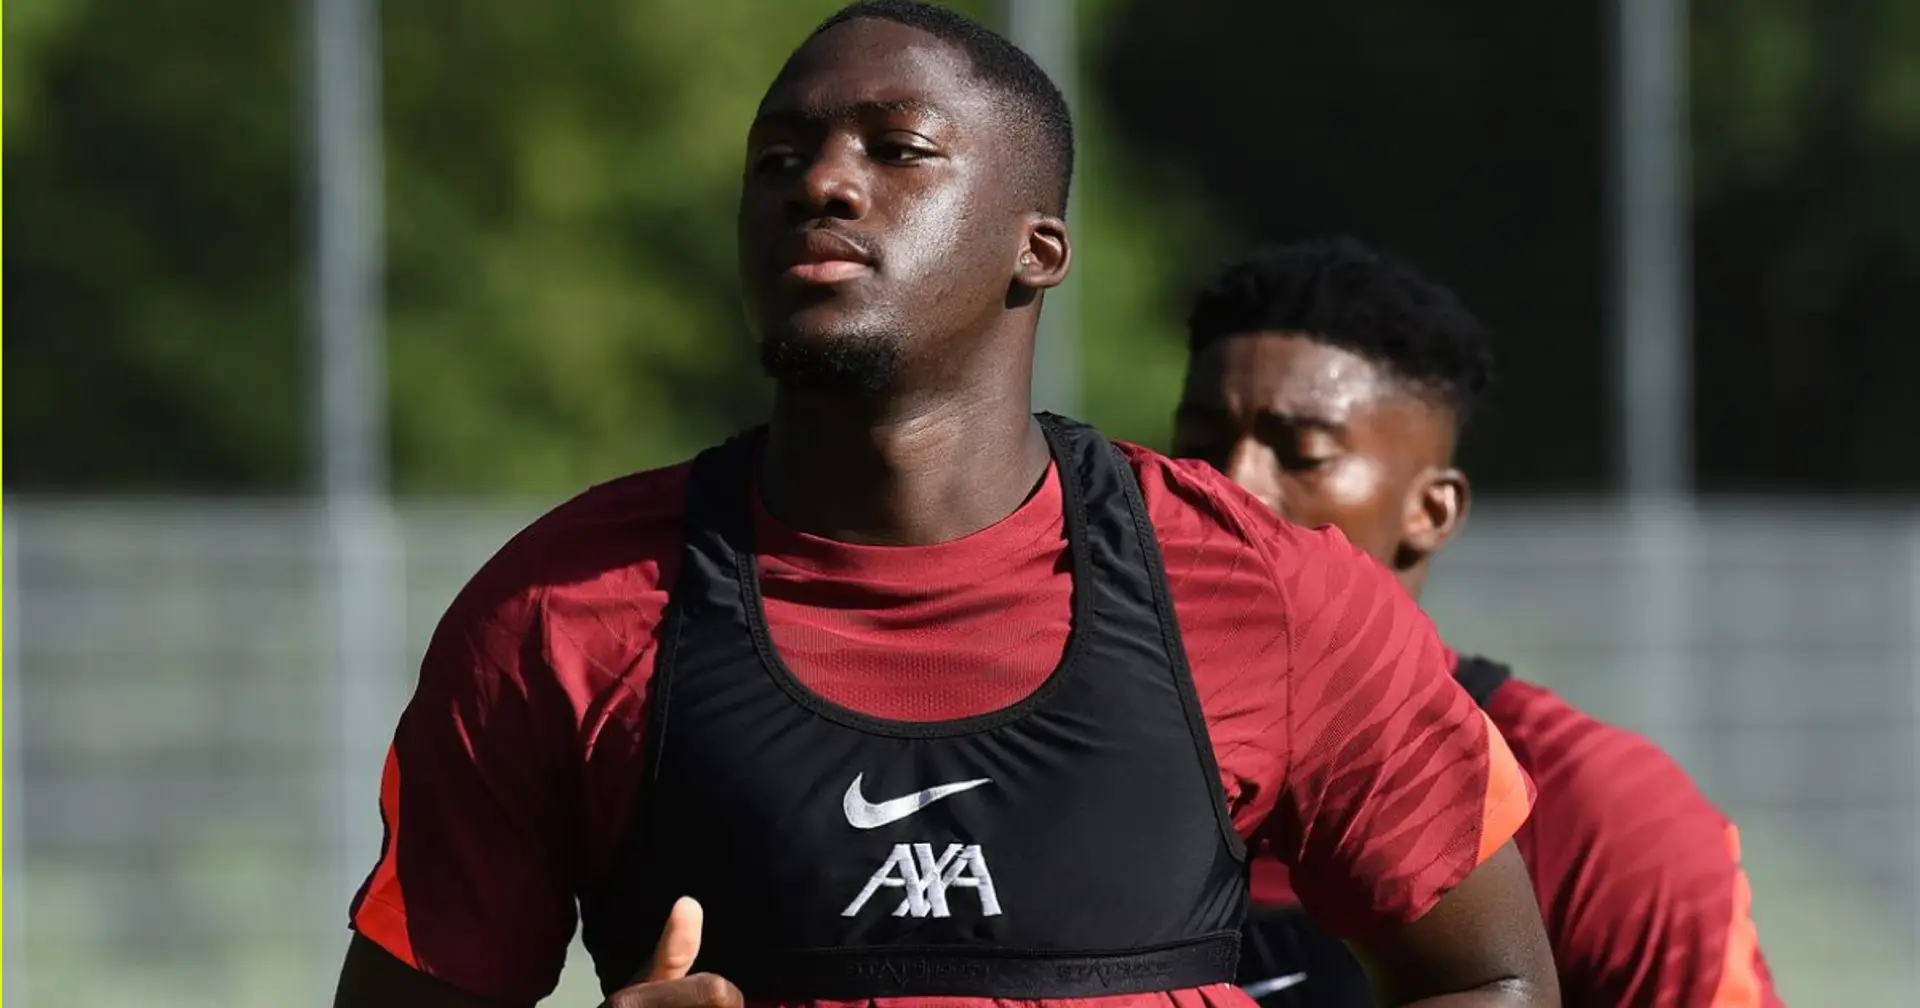 Konate back in training and 3 more big stories you might've missed